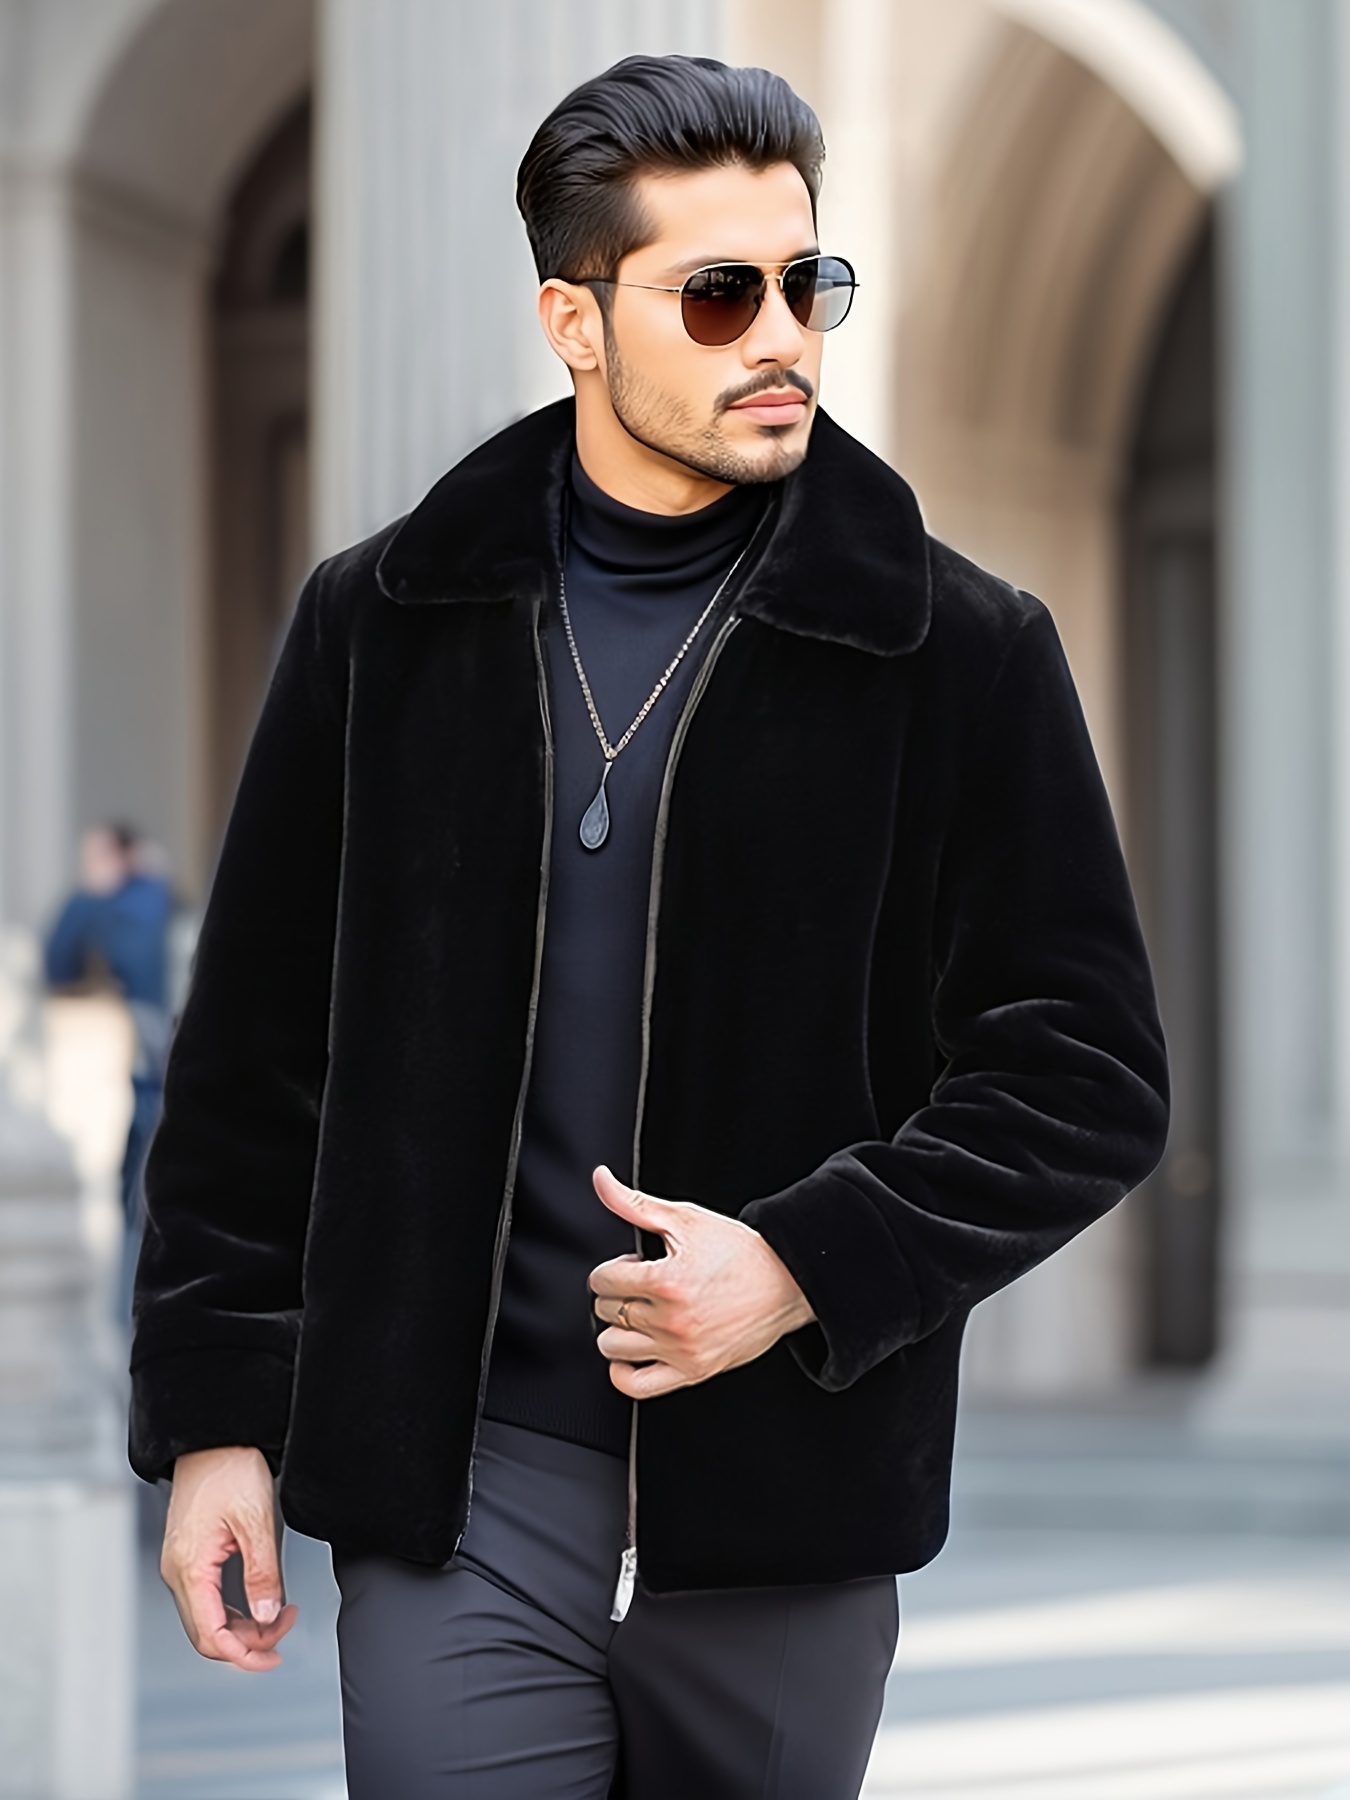 Warm Fleece PU Jacket, Men's Casual Solid Color Zip Up Fur Collar Faux  Leather Jacket For Fall Winter